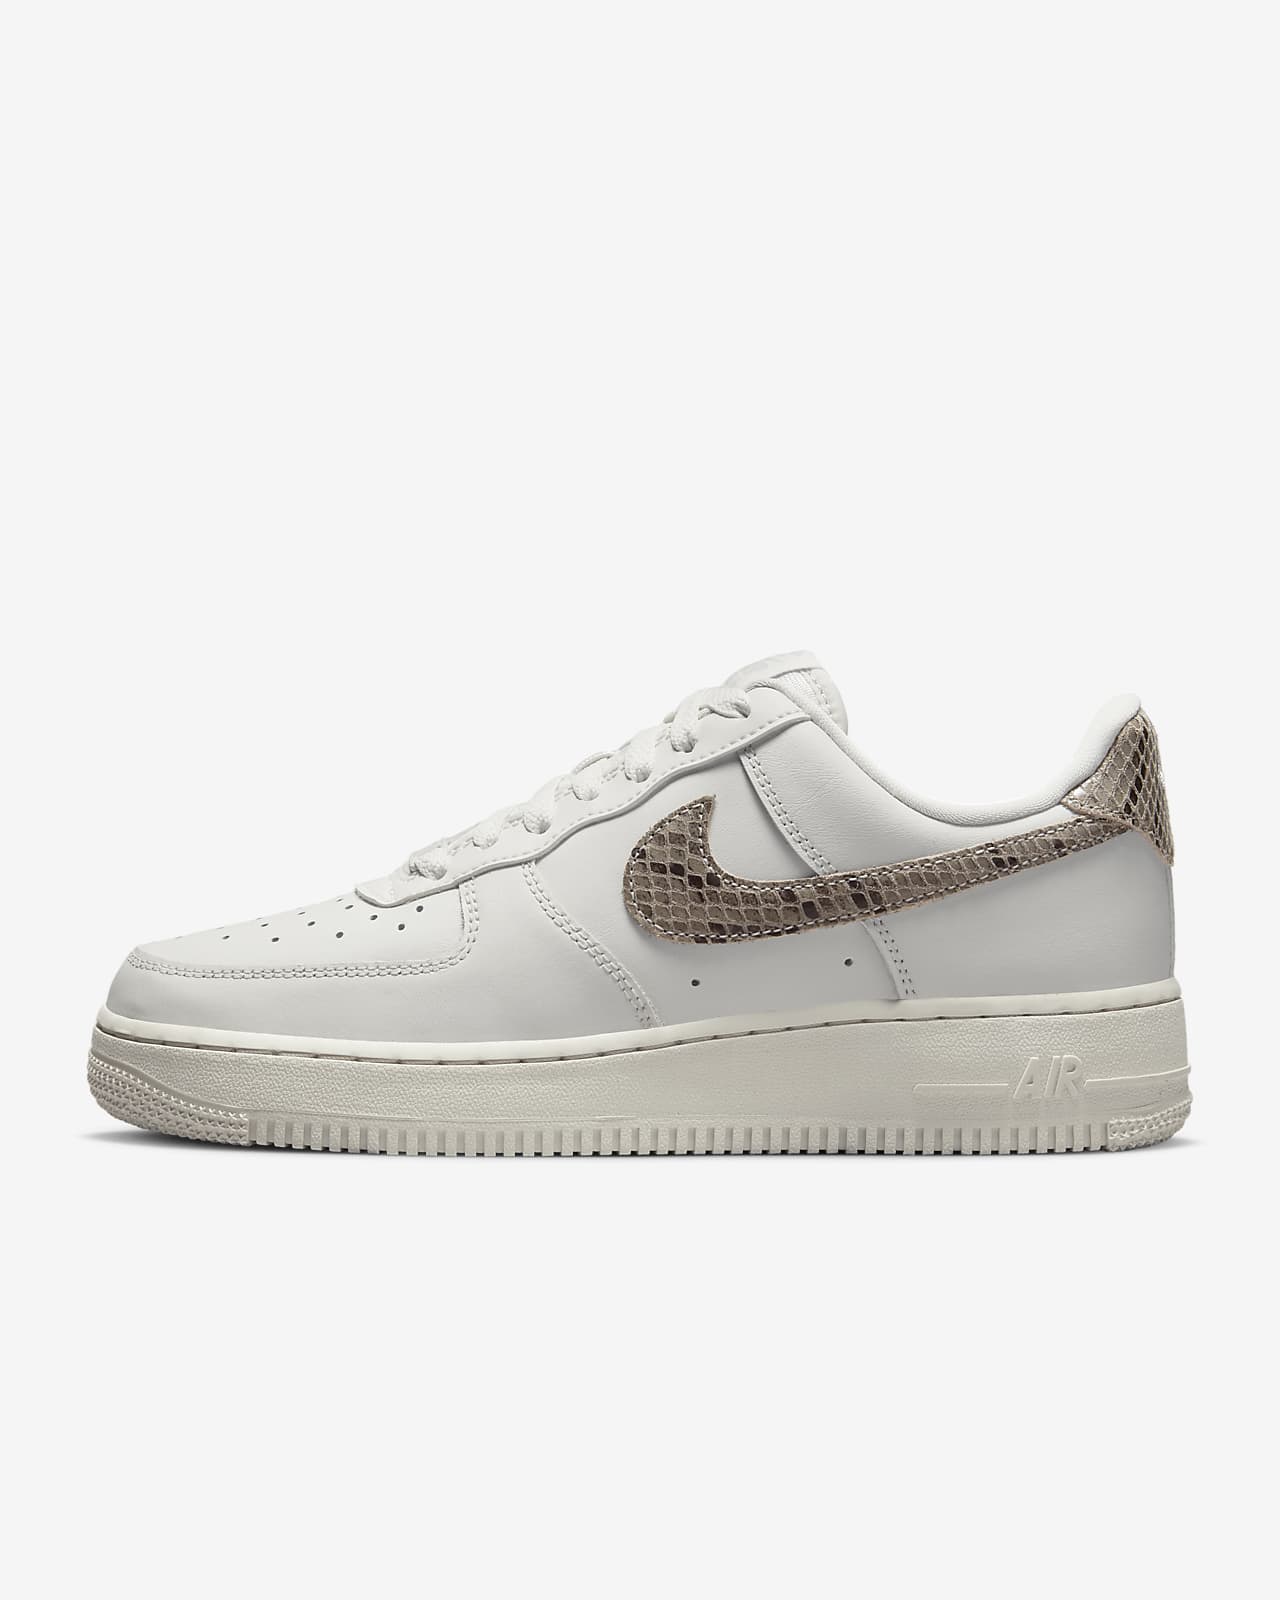 Nike Air Force 1 Mid Women's Shoes